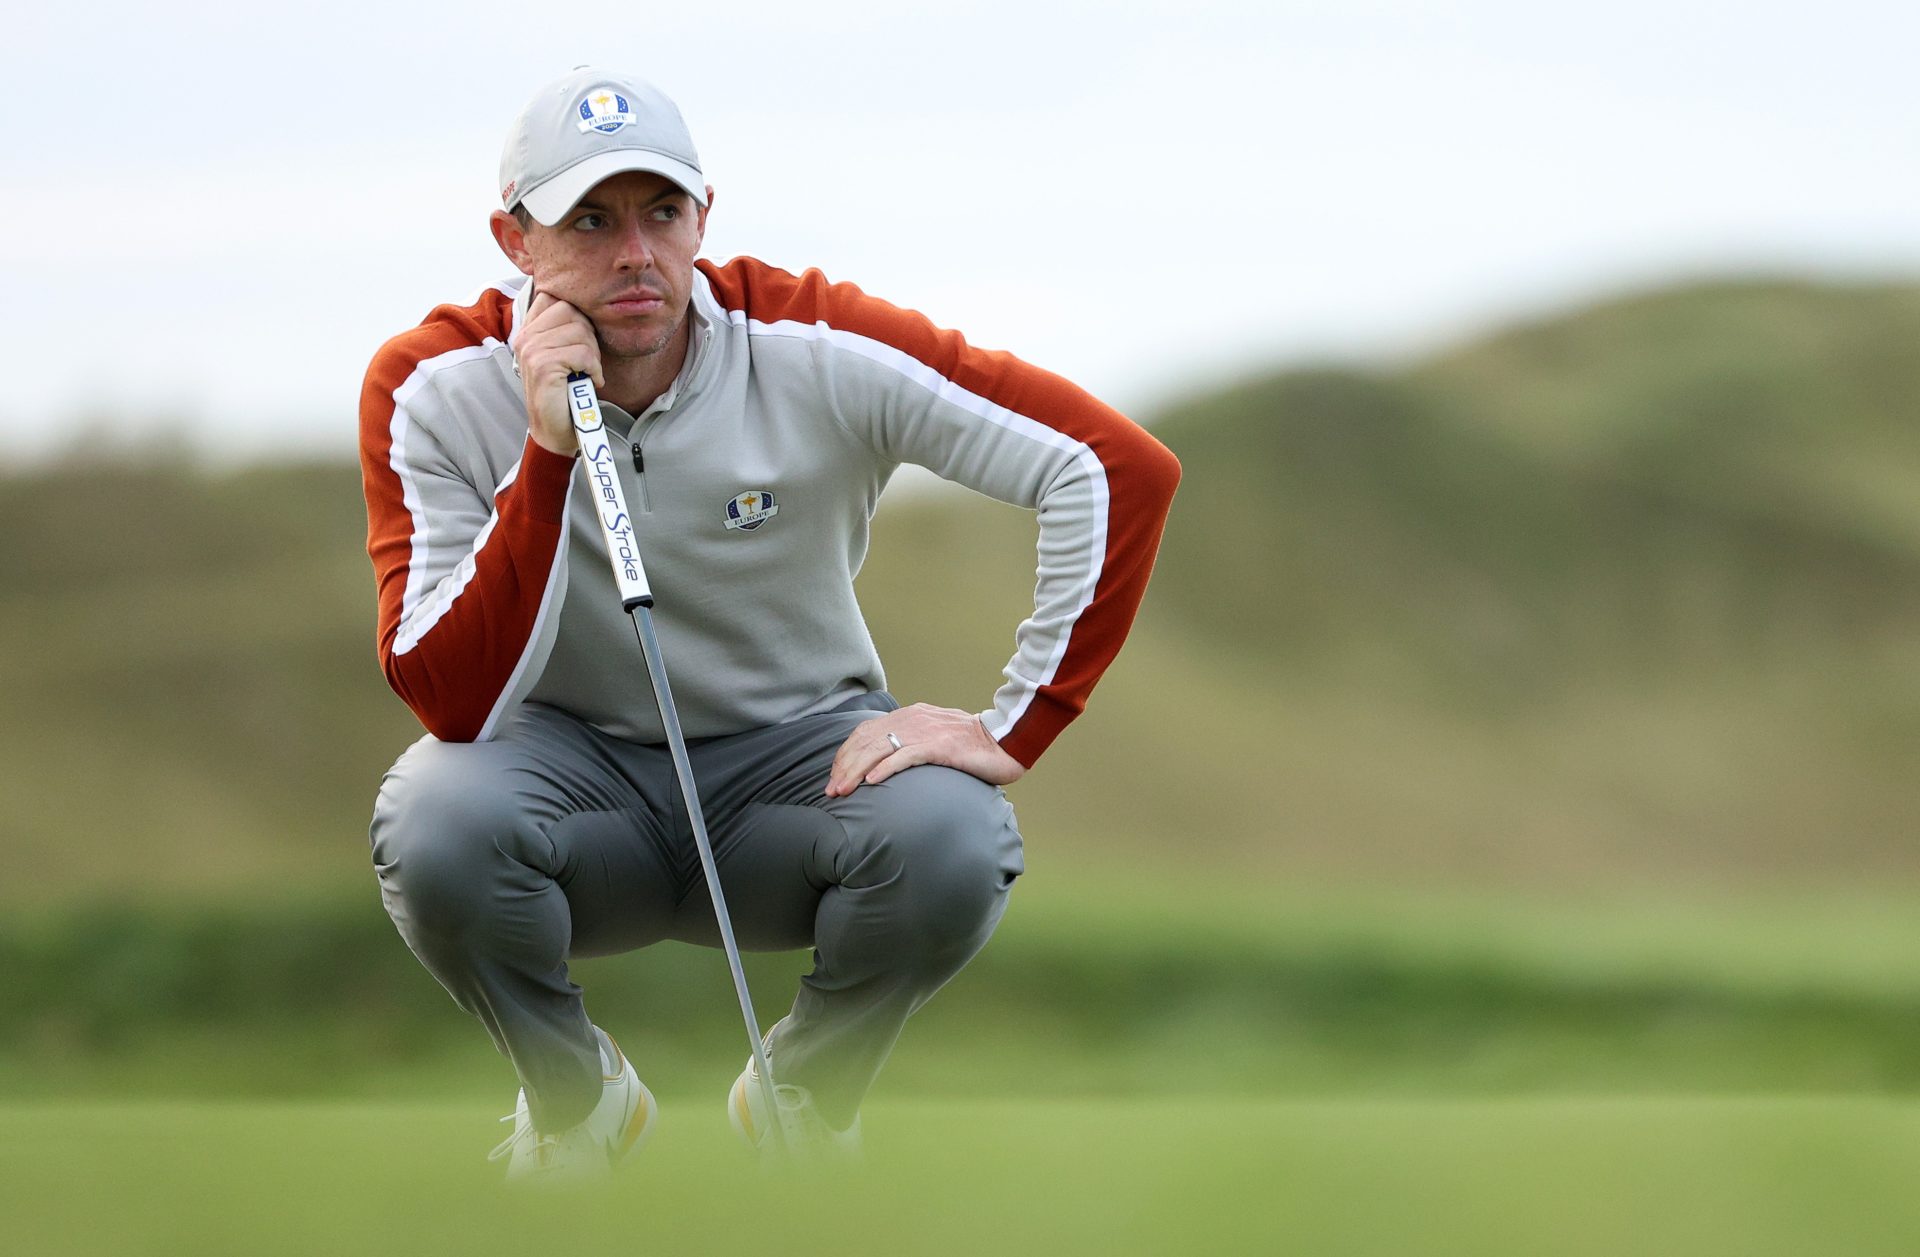 An image of Rory McIlroy - the professional golfer from Northern Ireland